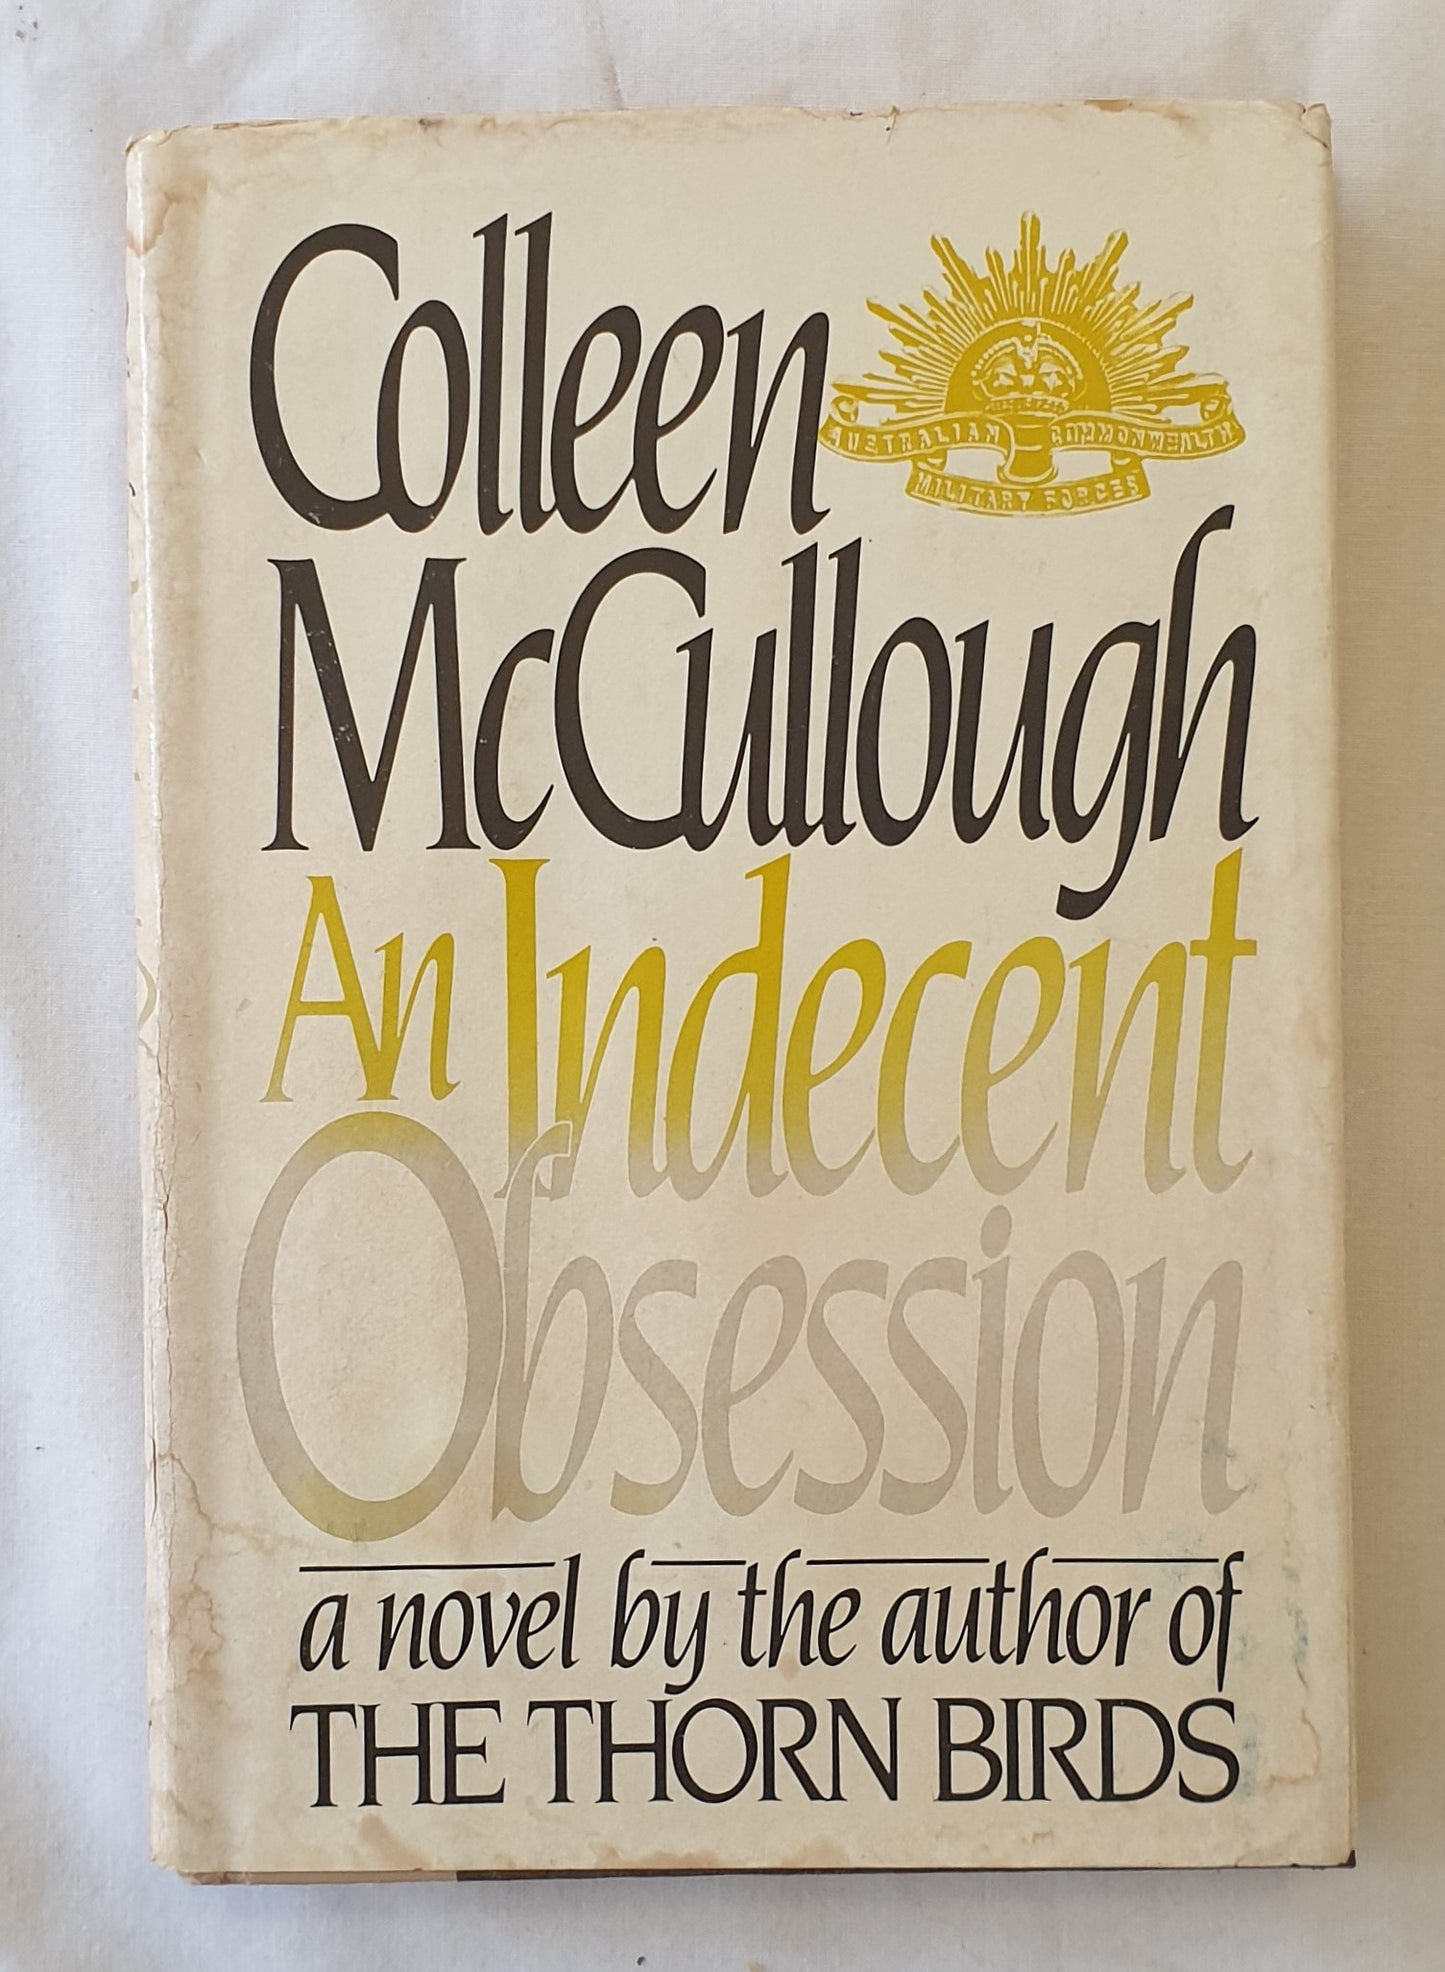 An Indecent Obsession by Colleen McCullough